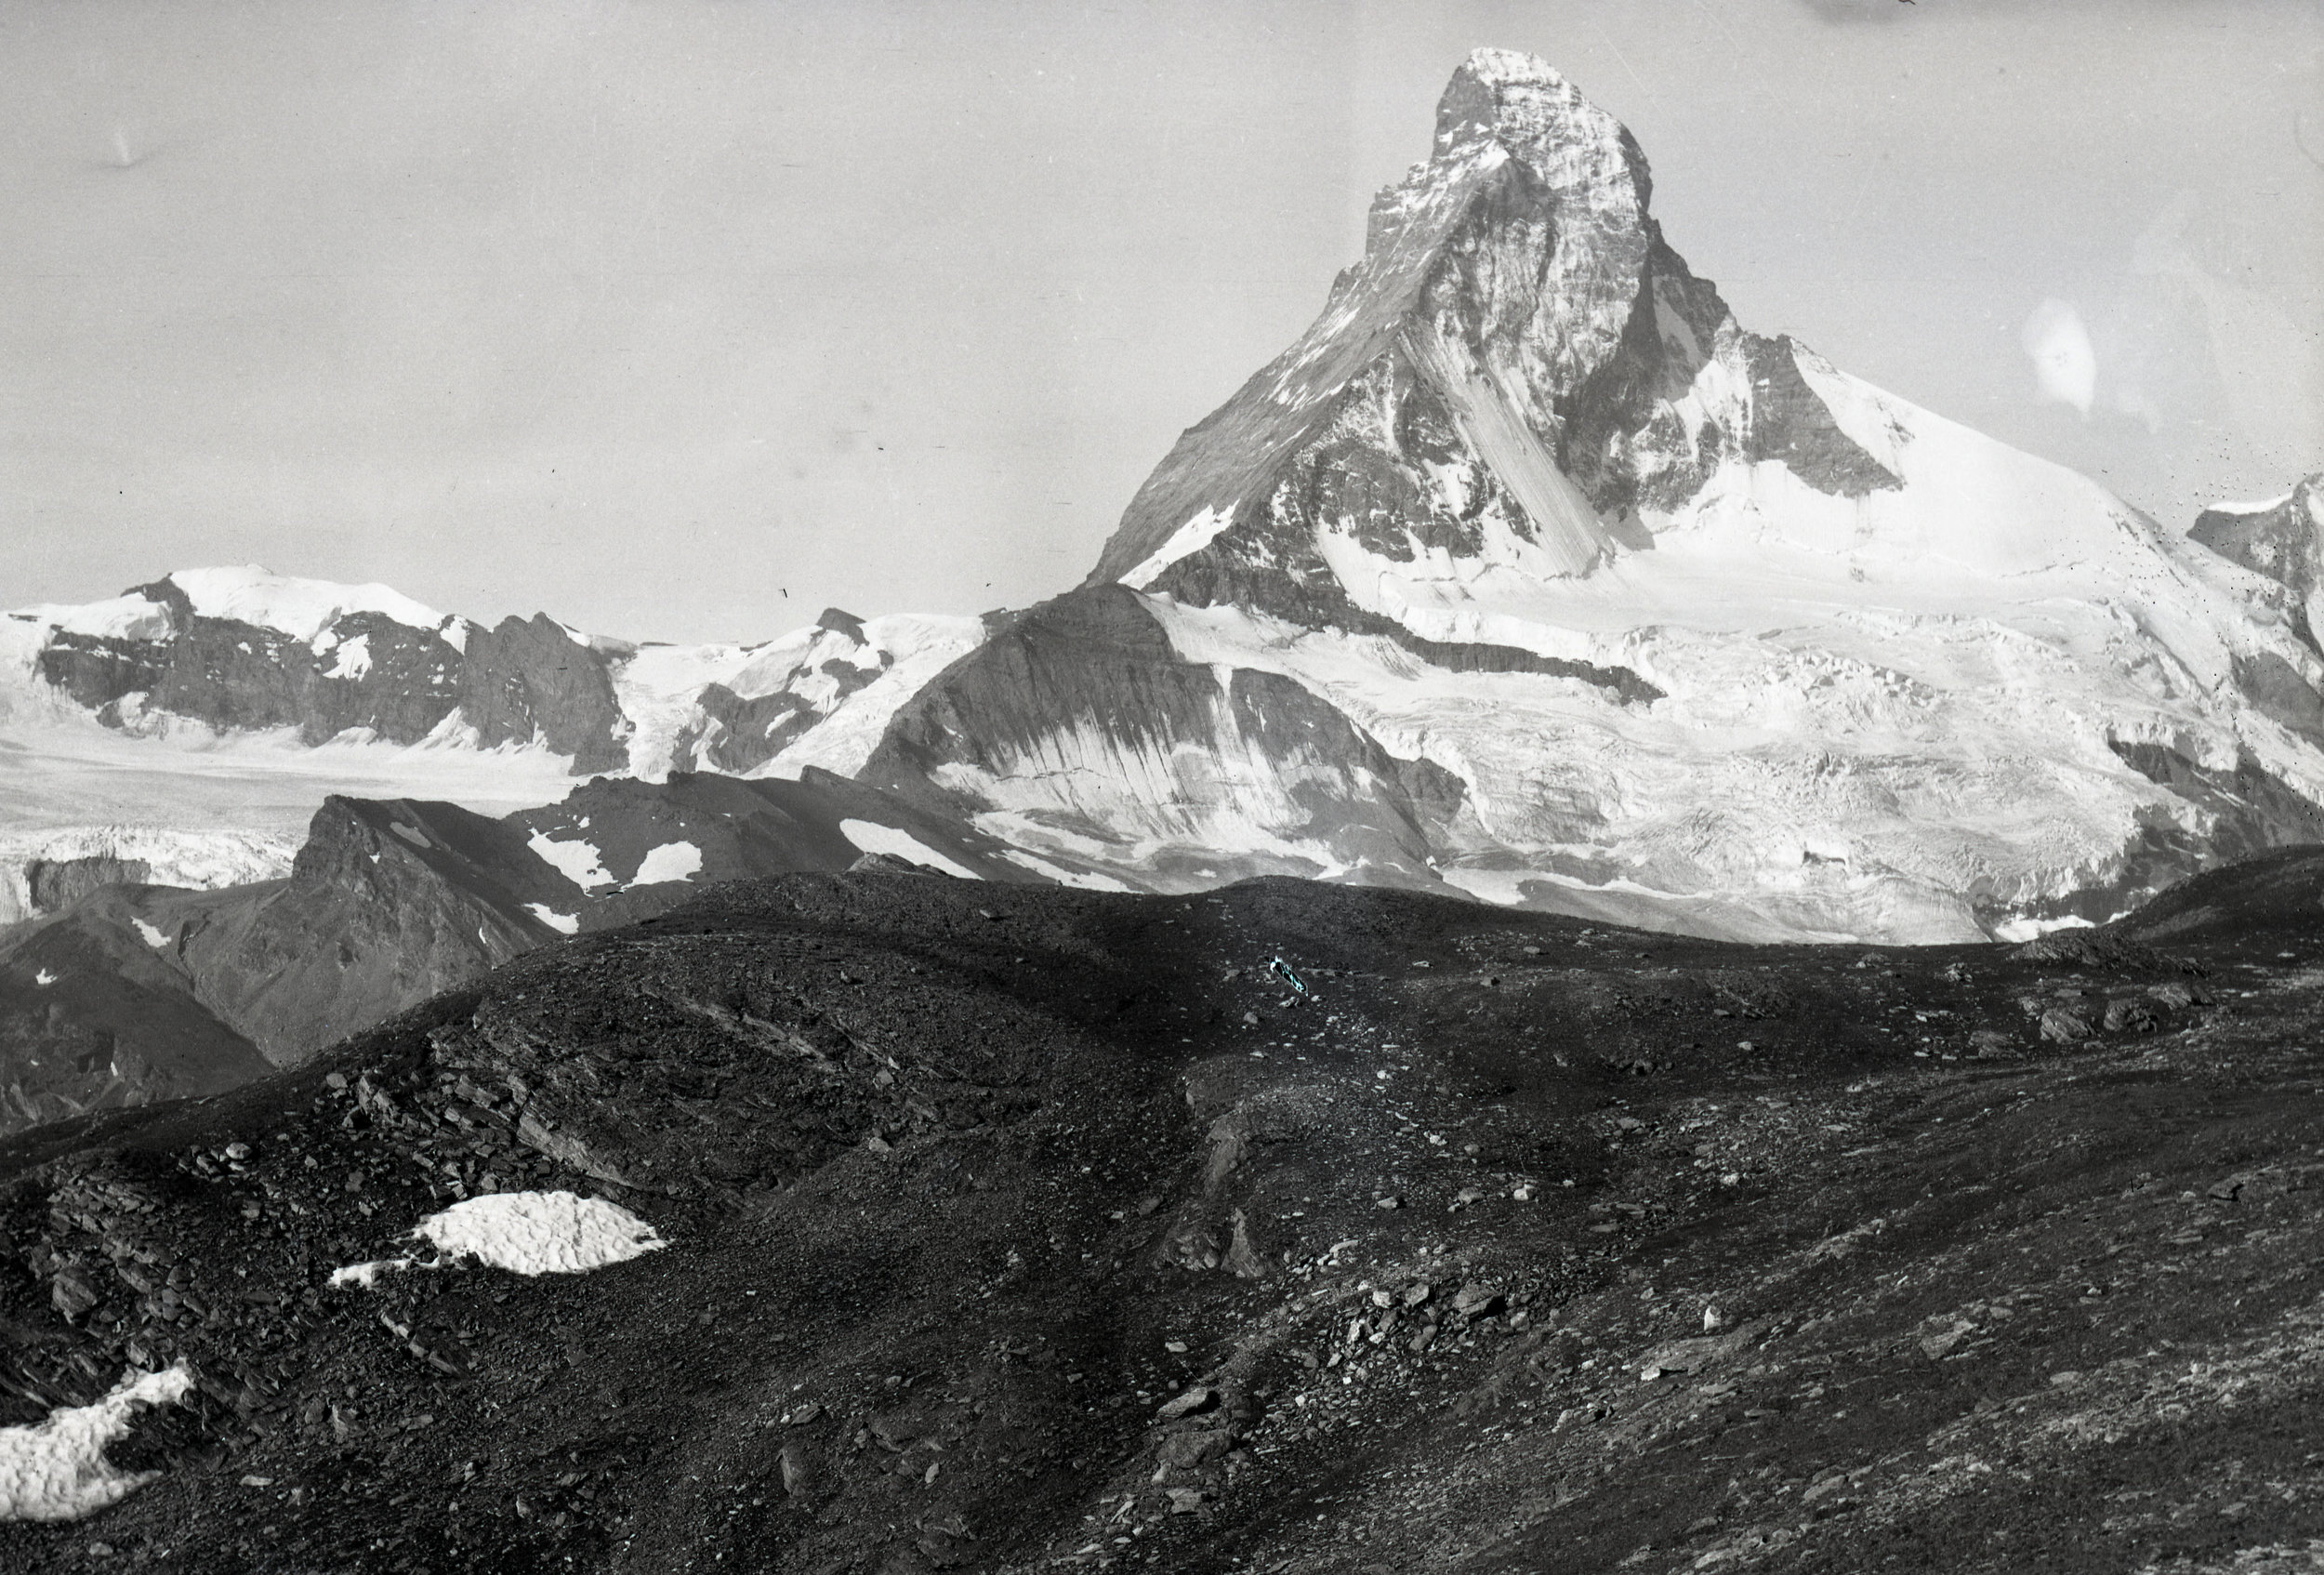  The Matterhorn, photographed from the North 